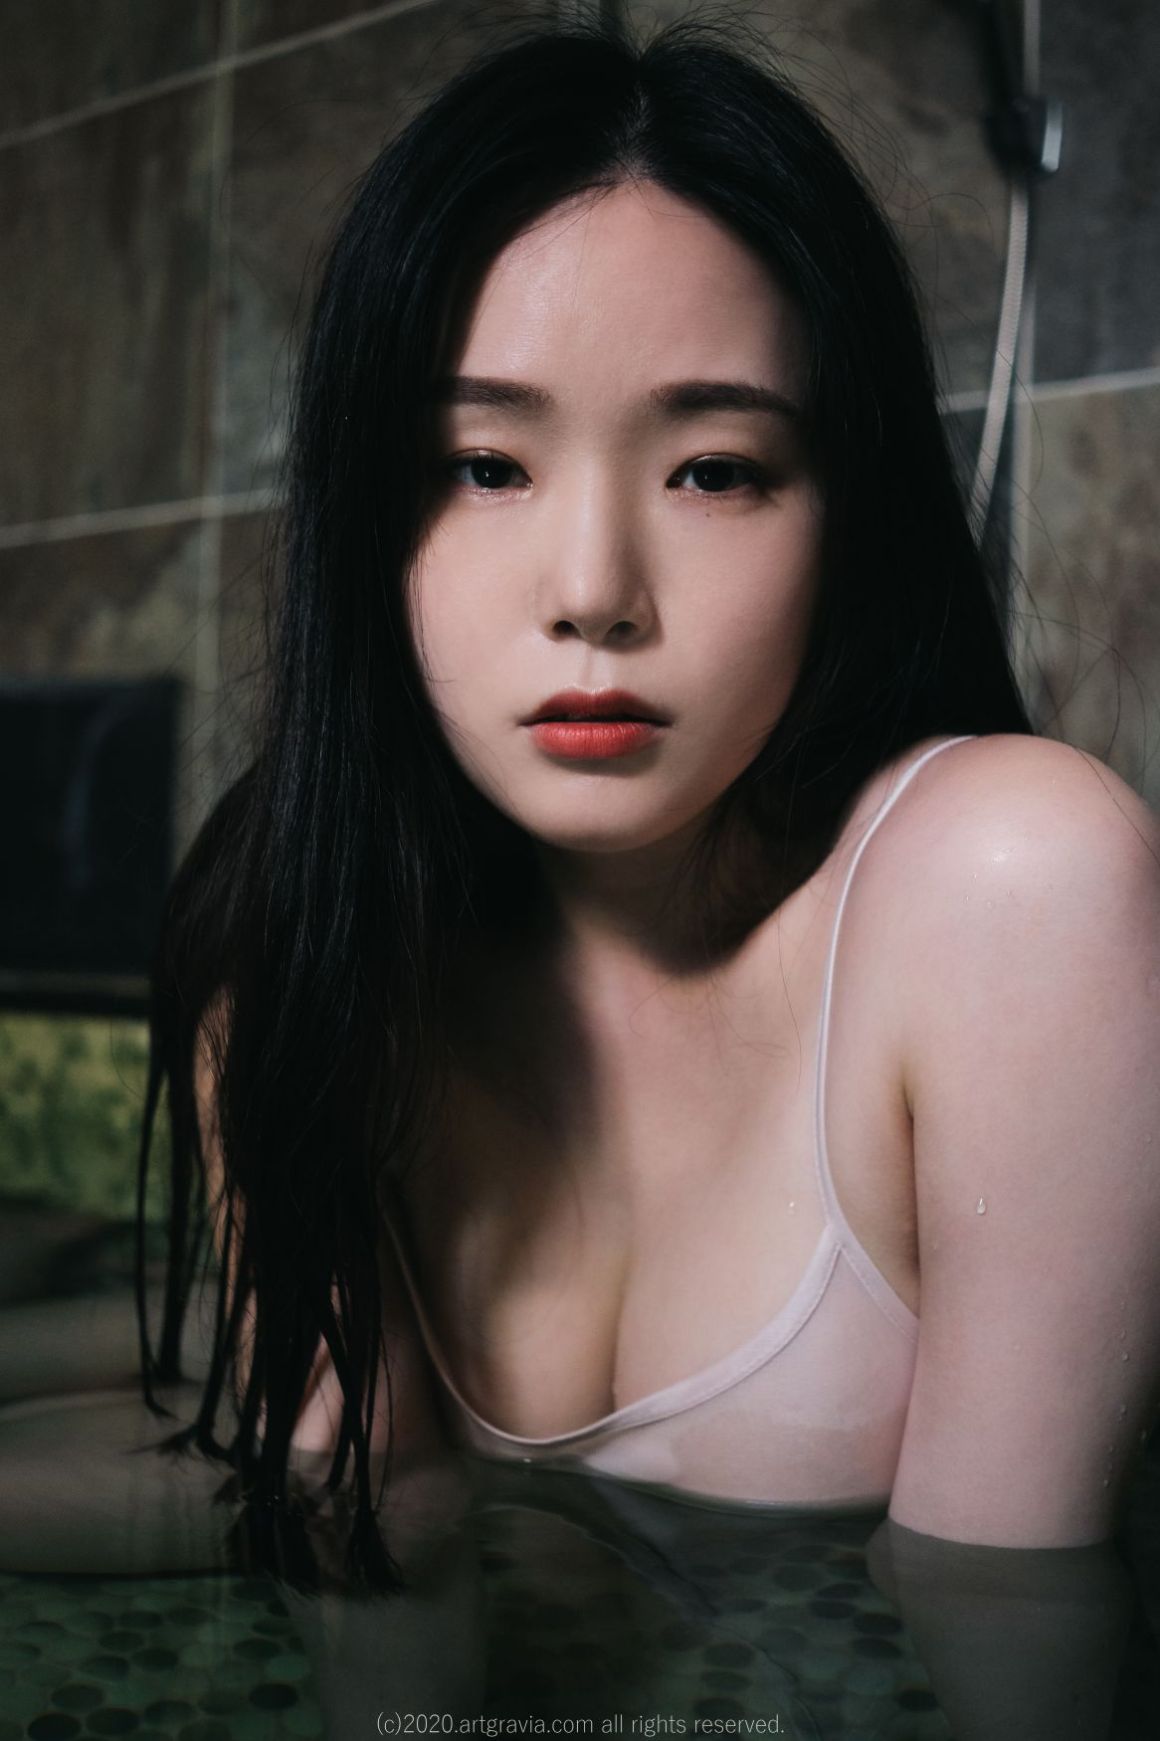 AsianOnlyfans.com 35 154 20211010